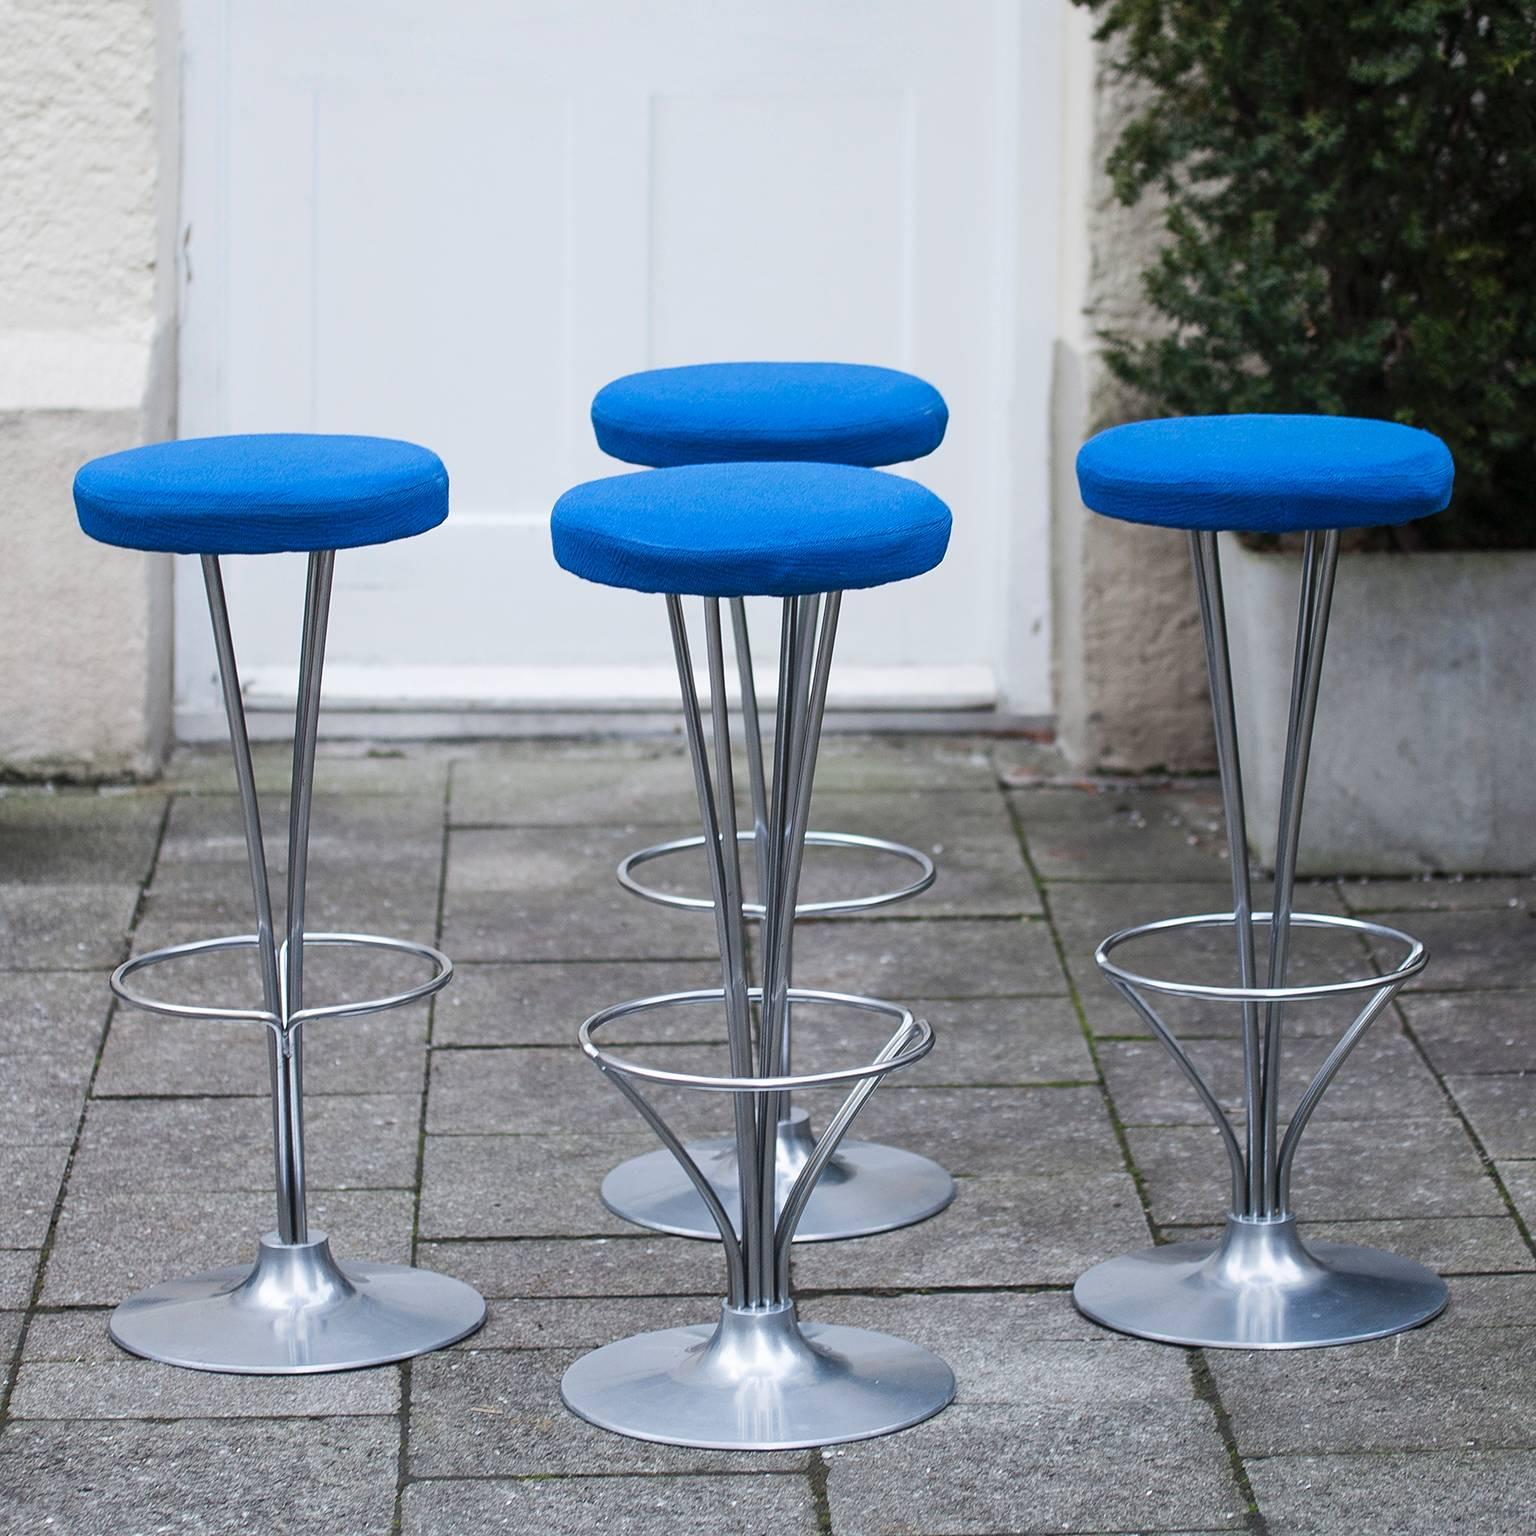 This bar stool was designed by Piet Hein, who also developed the Super ellipse table with Bruno Mathsson. These bar stools were produced by Fritz Hansen in Denmark in the 1960s and are covered with blue fabric.

Measures: H 80 x D 35 cm.